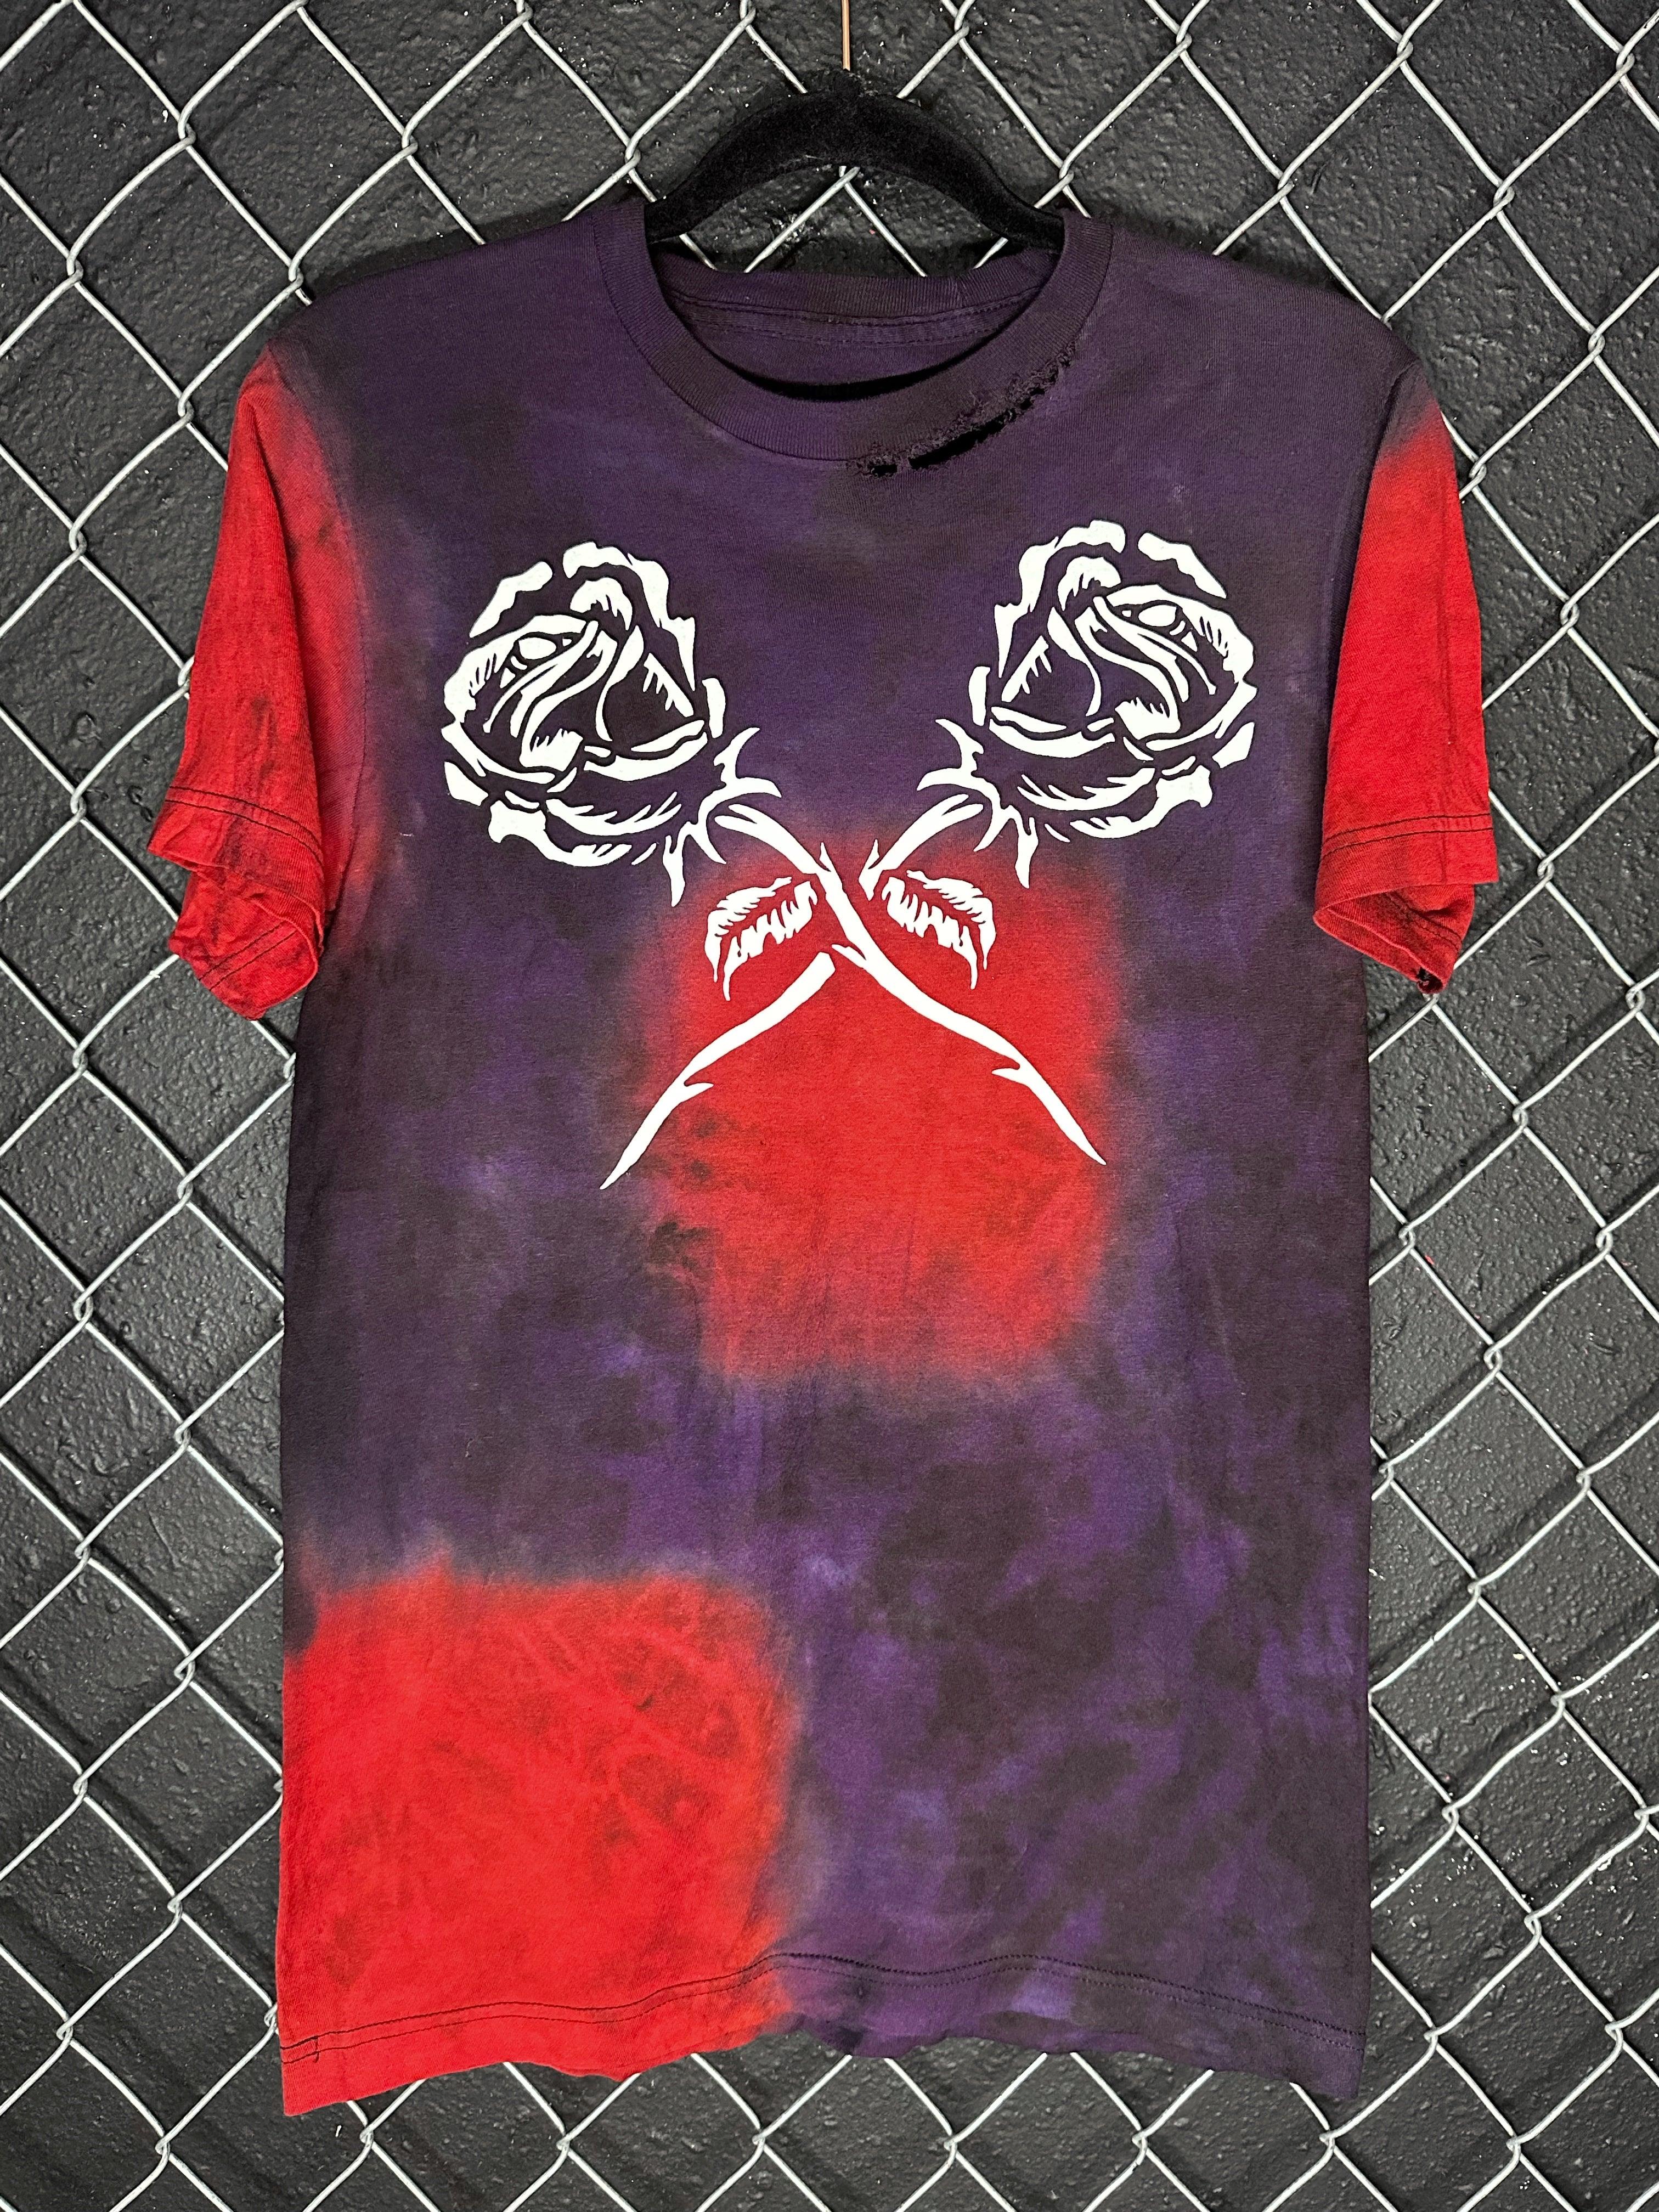 #TDC - A136 - DEAD ROSE - ROAD RASH - SMALL - The Drive Clothing